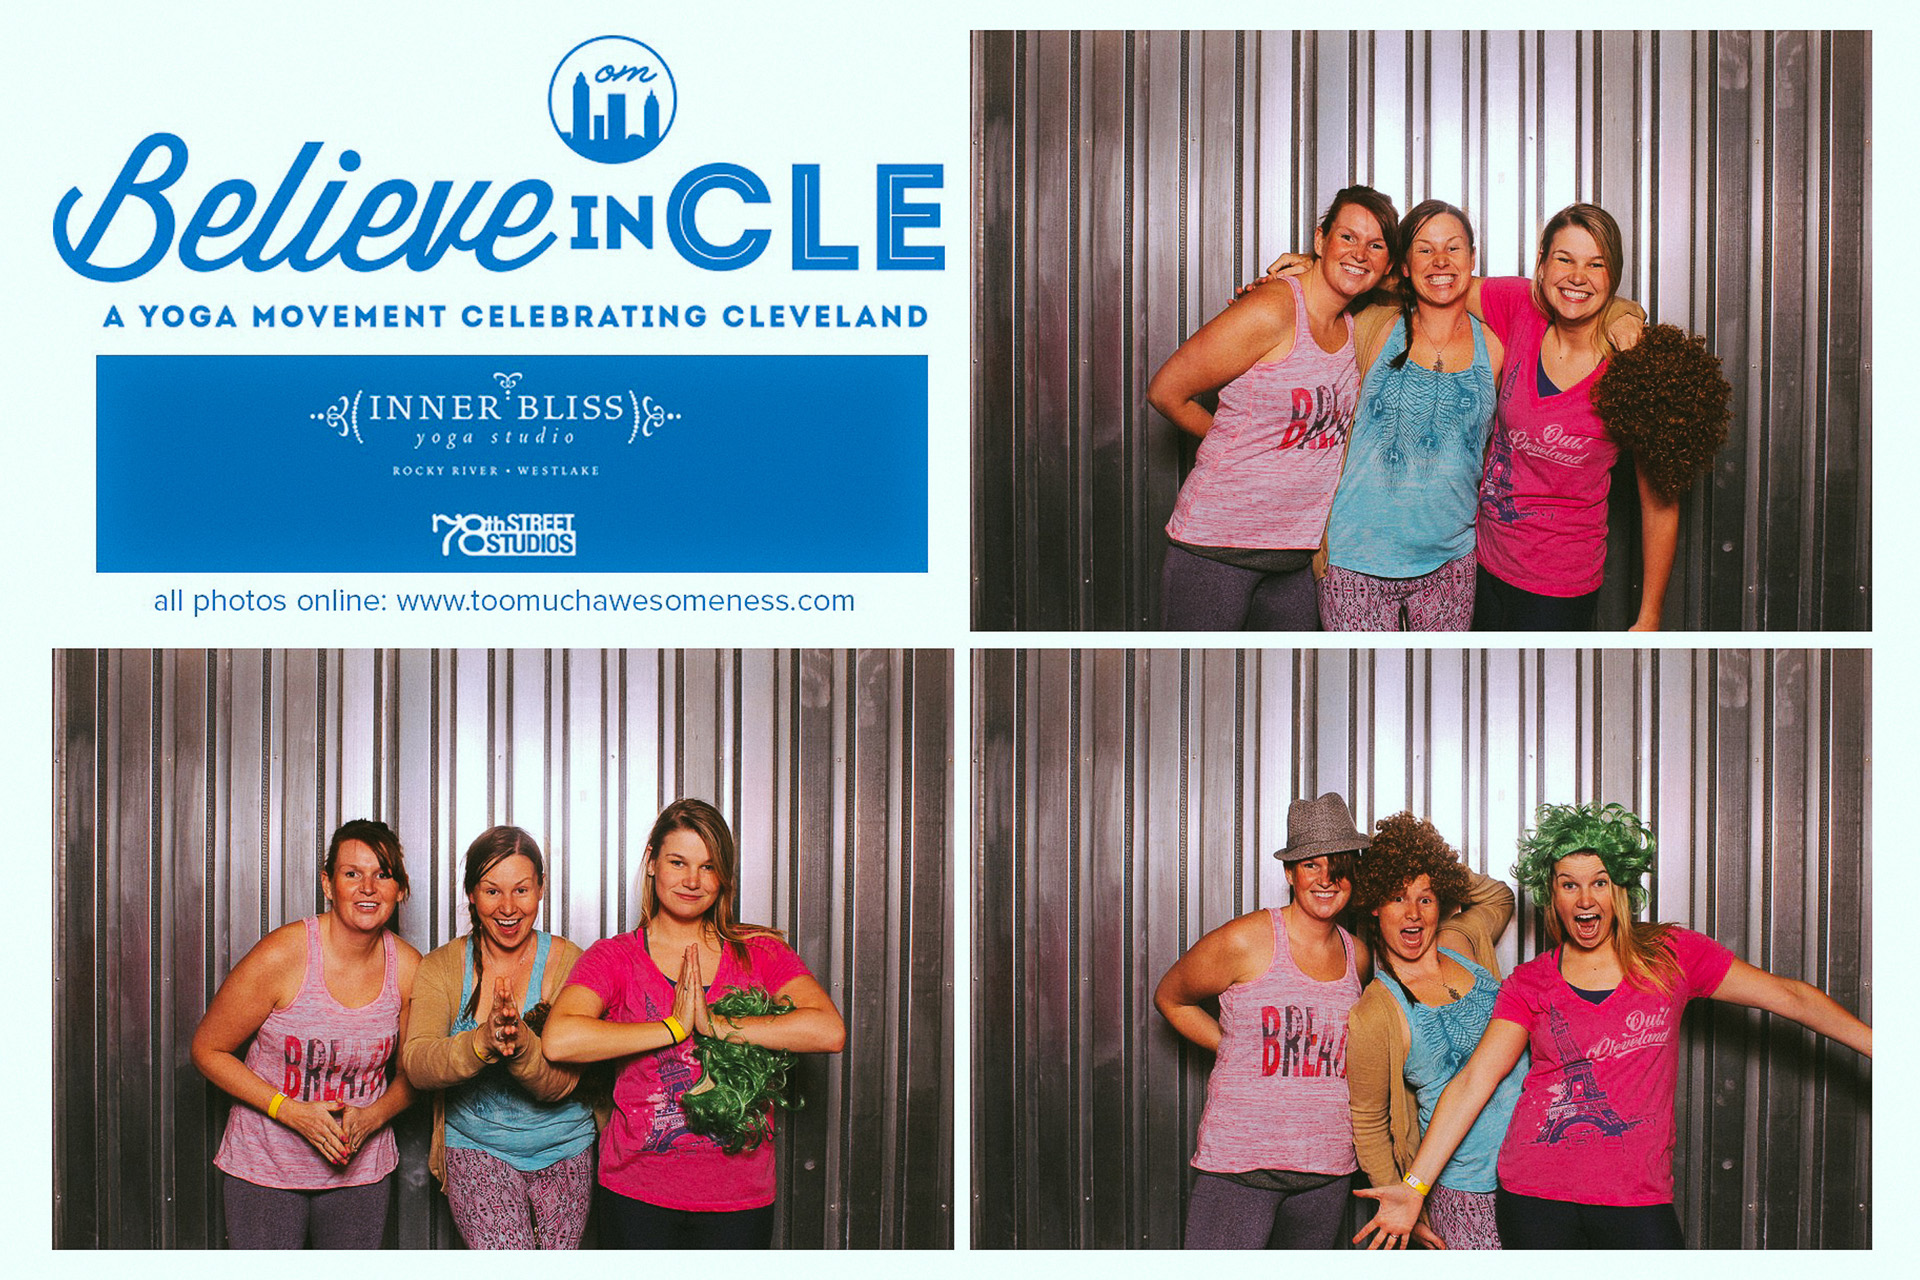 Believe in CLE Photobooth in Cleveland 02.jpg